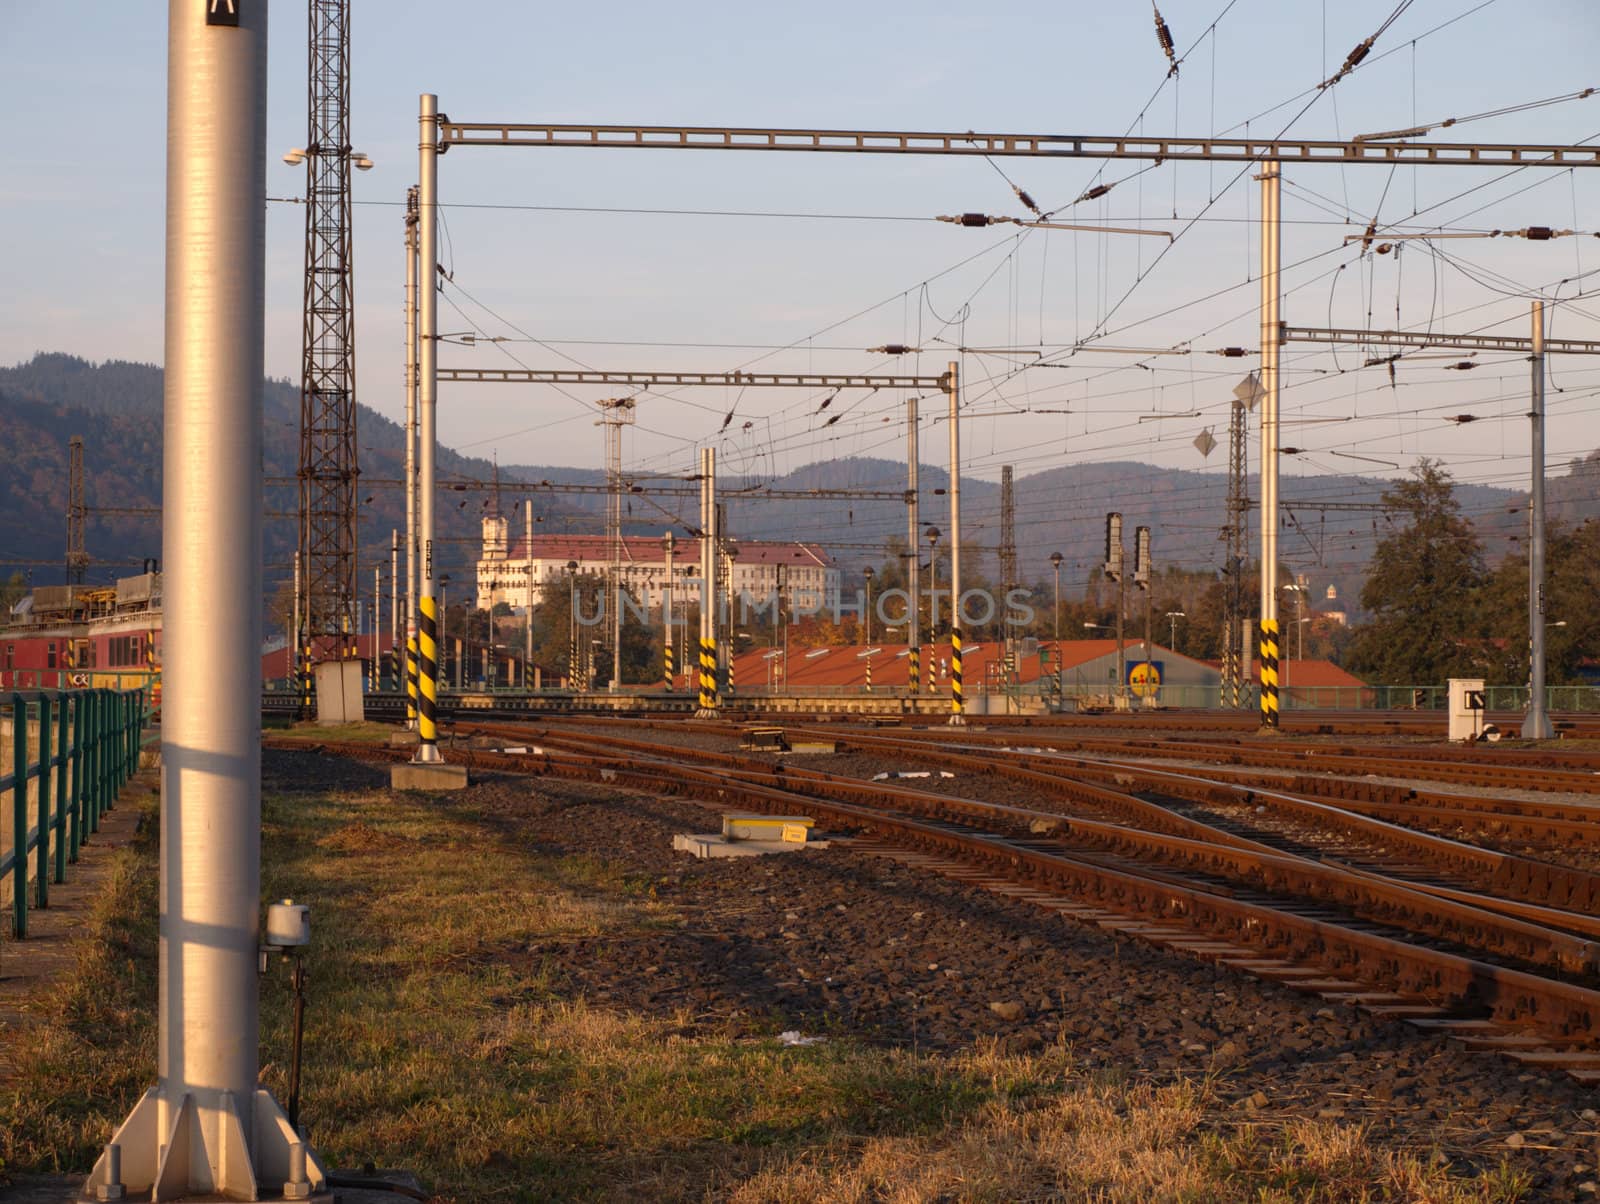 Railway station in Decin - the wiev from other side